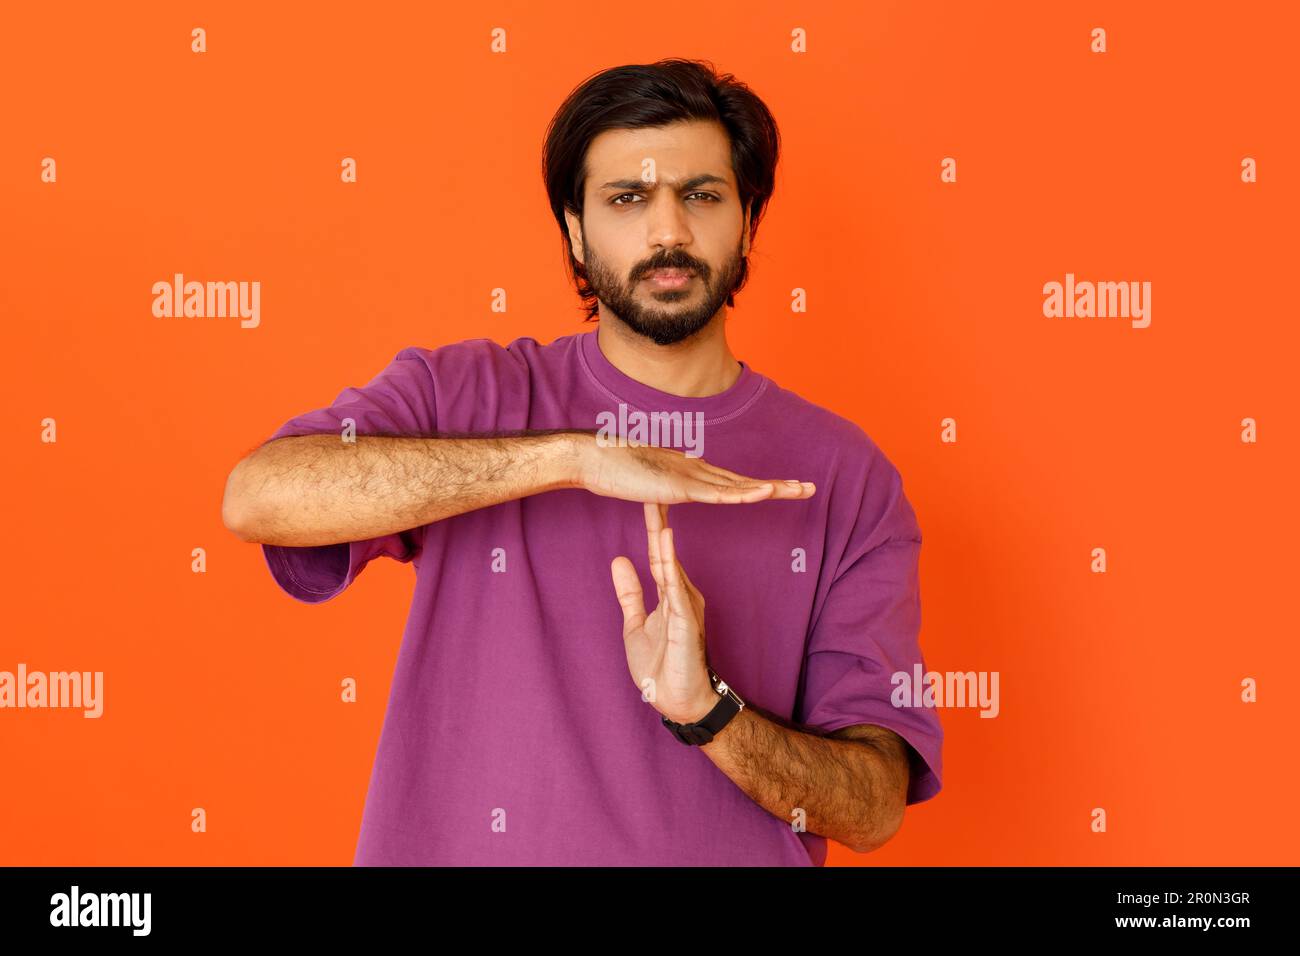 Serious tired indian man showing timeout symbol with hands Stock Photo